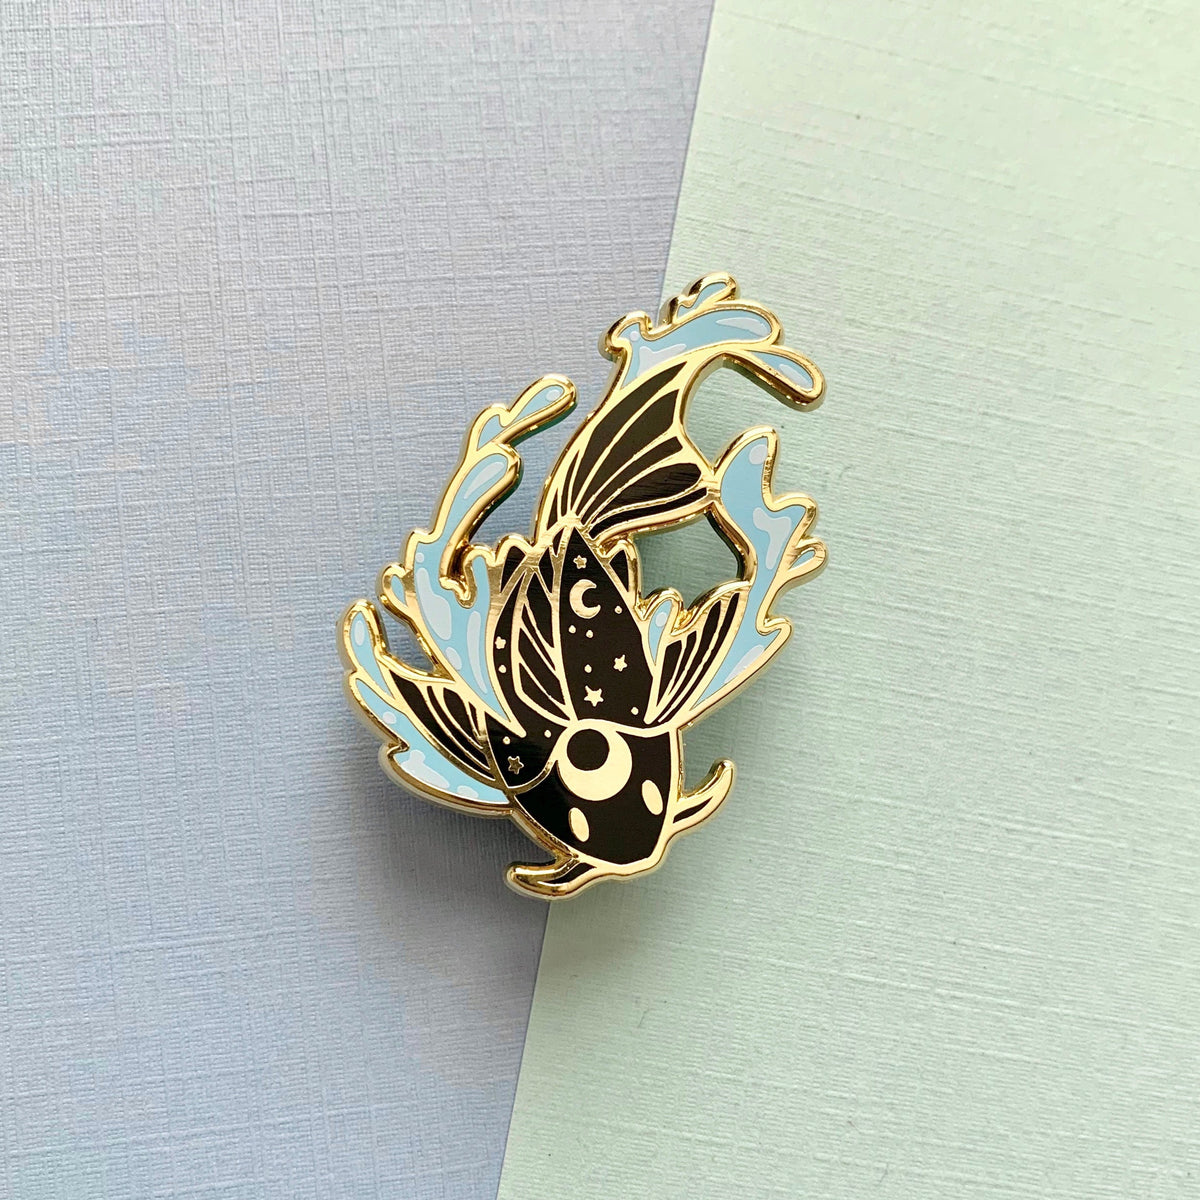 Starry Koi Enamel Pin by Shumi Collective